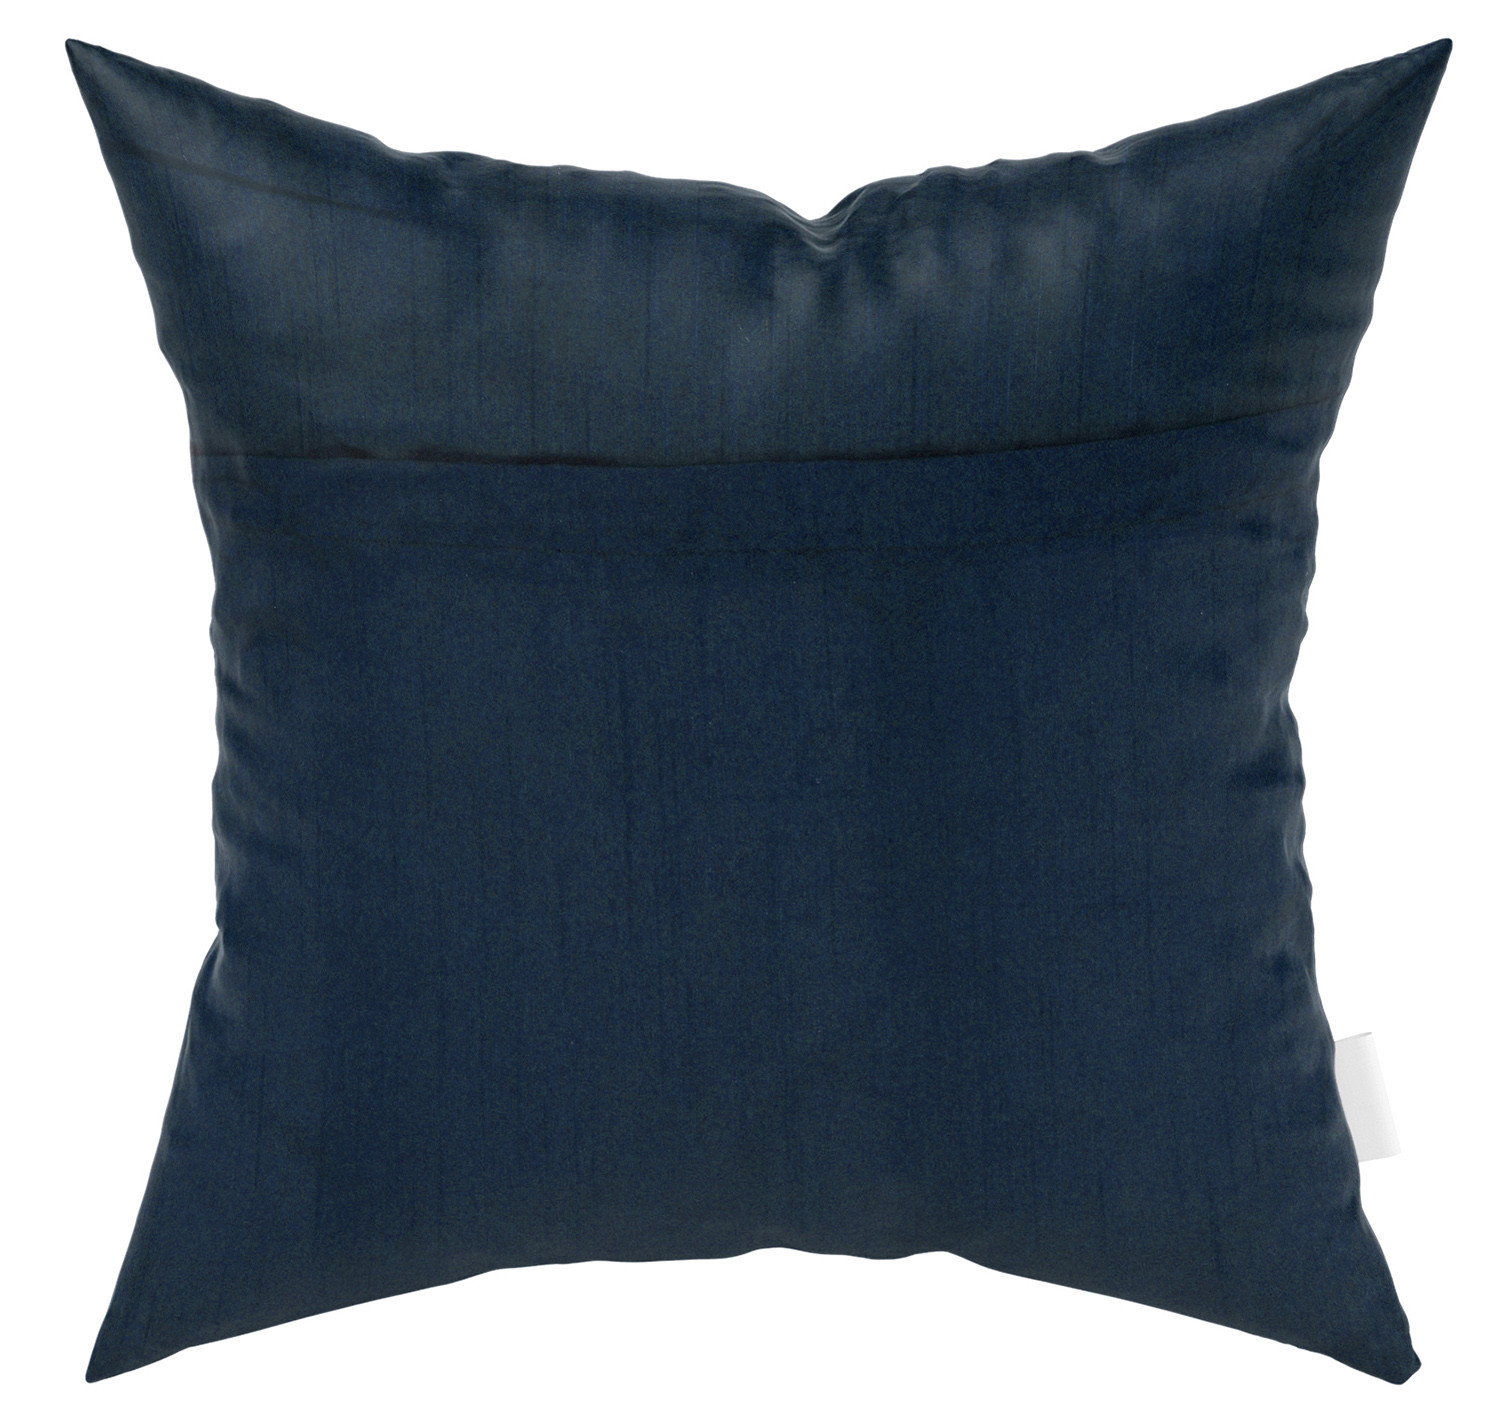 Kuber Industries Dot Print Soft Decorative Square Cushion Cover, Cushion Case For Sofa Couch Bed 16x16 Inch-(Navy Blue)